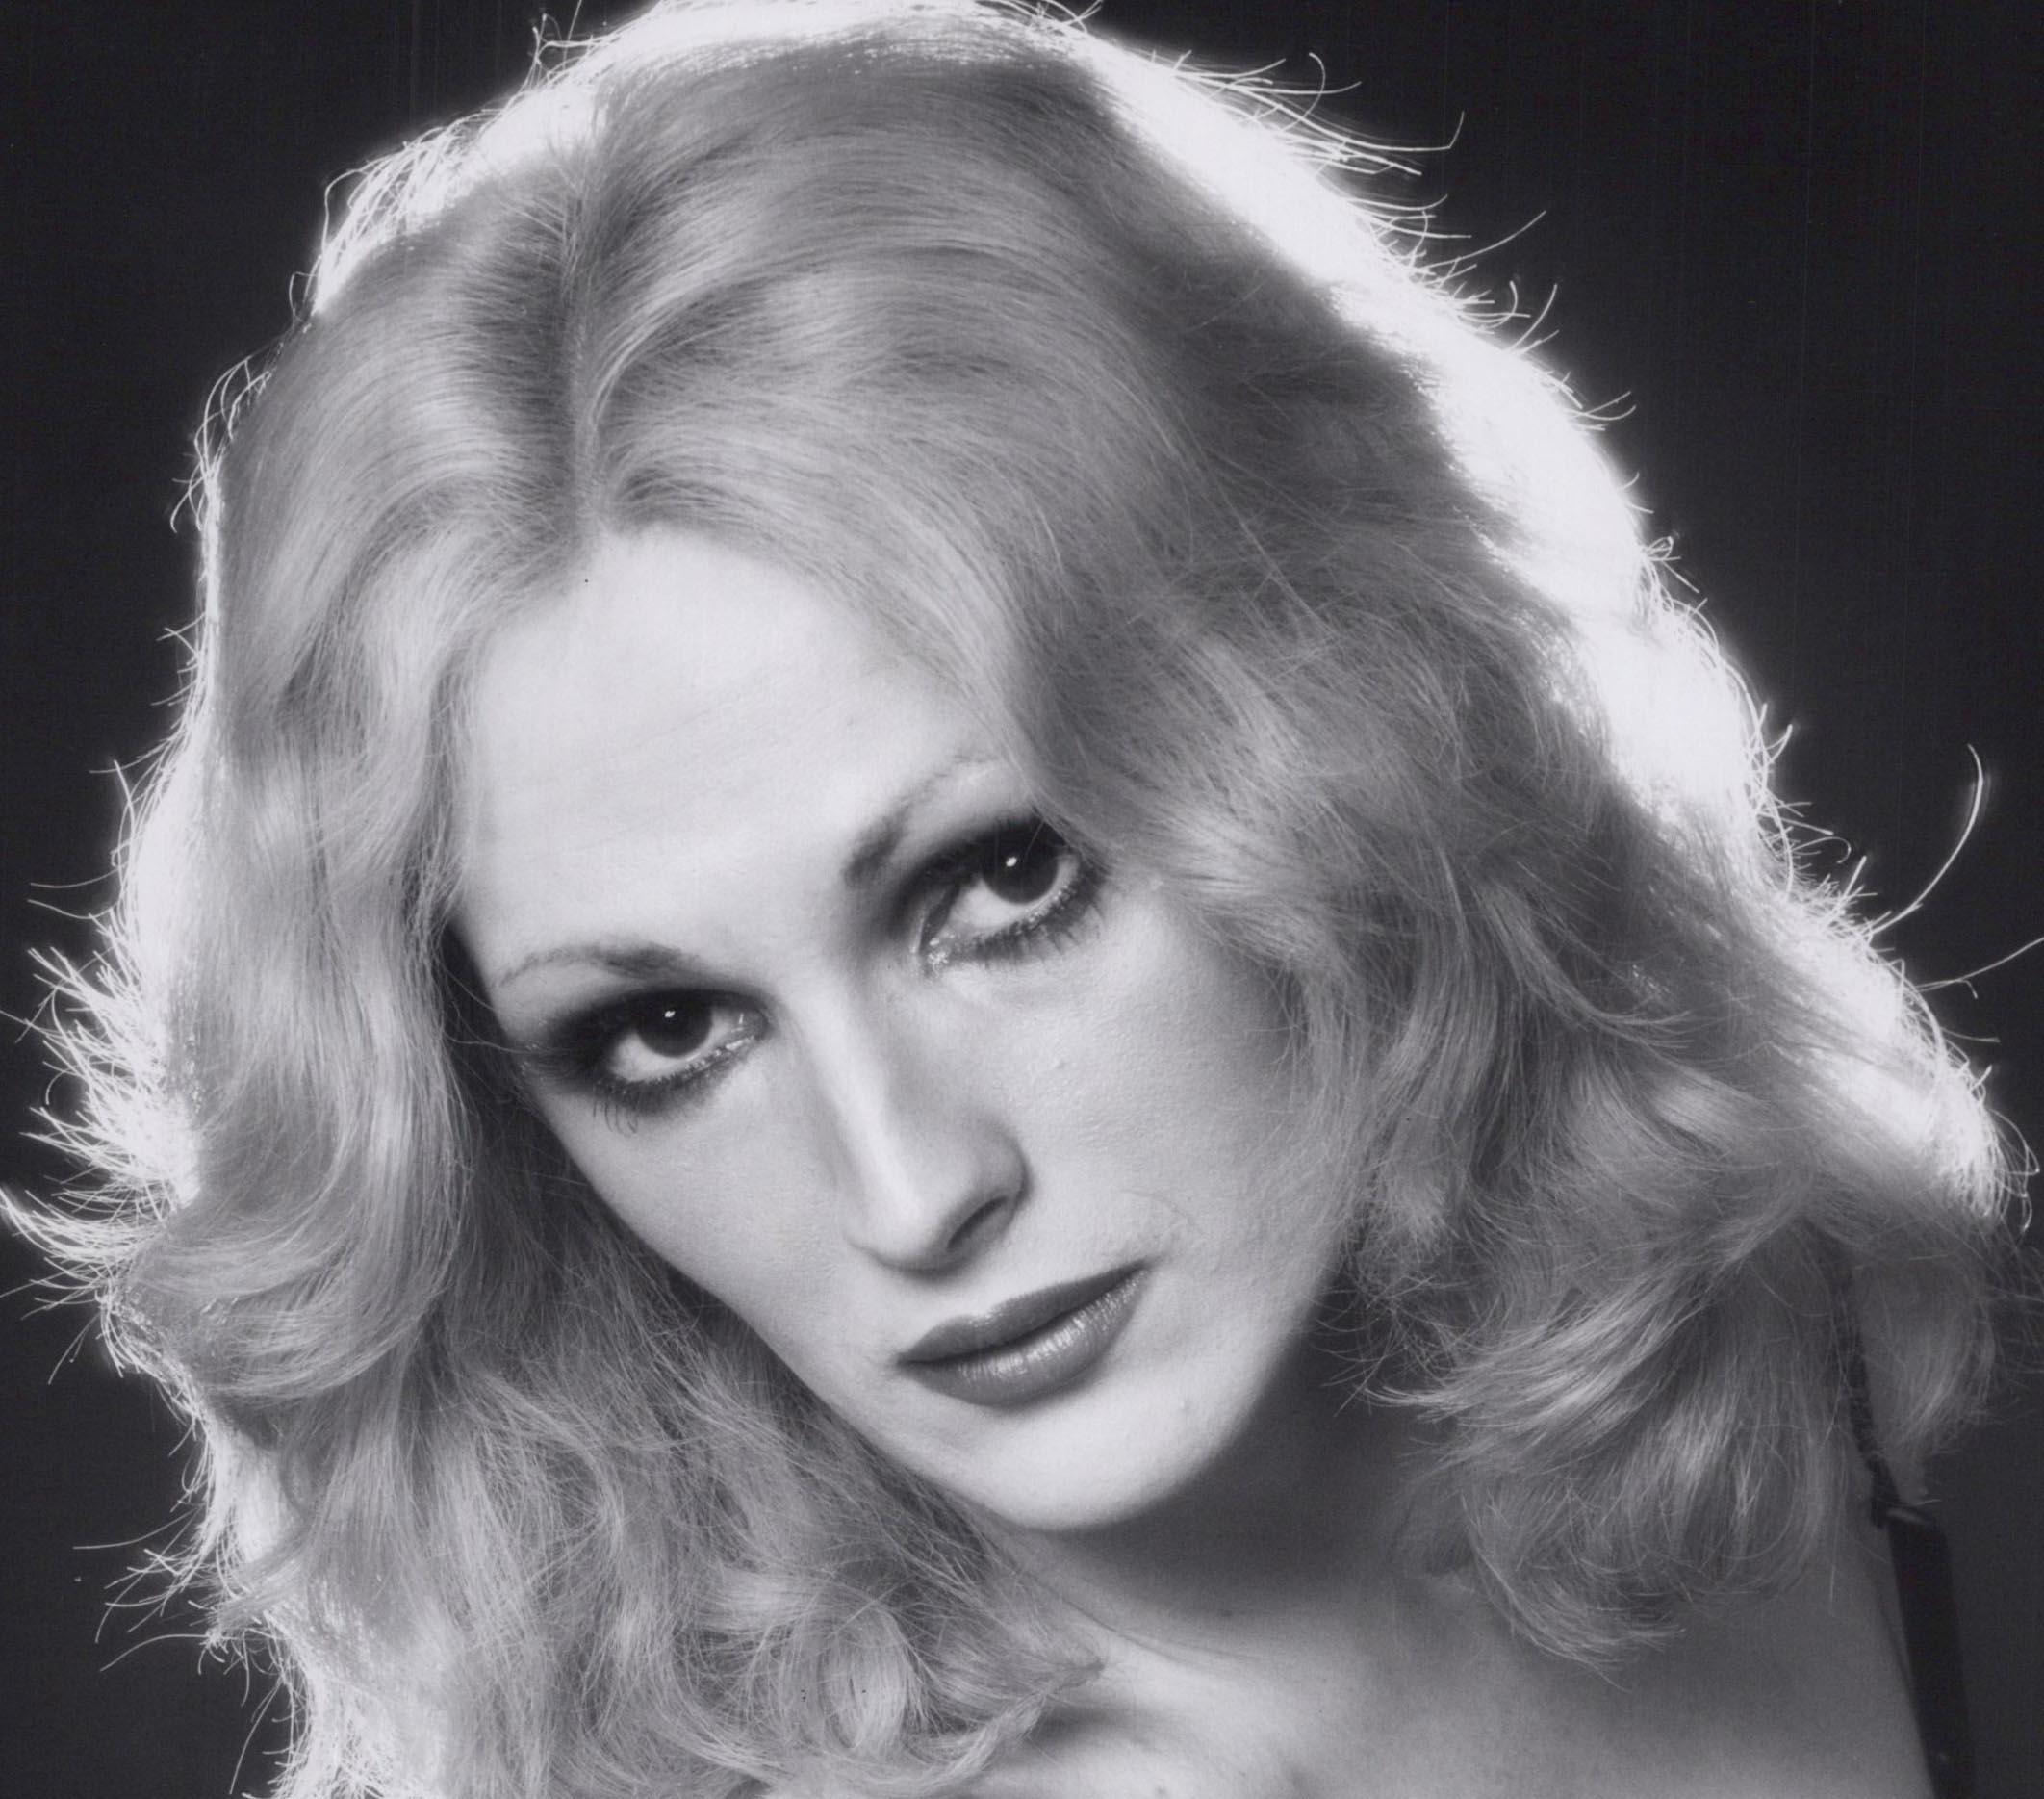 Andy Warhol Superstar Candy Darling Studio Portrait - Photograph by Jack Mitchell